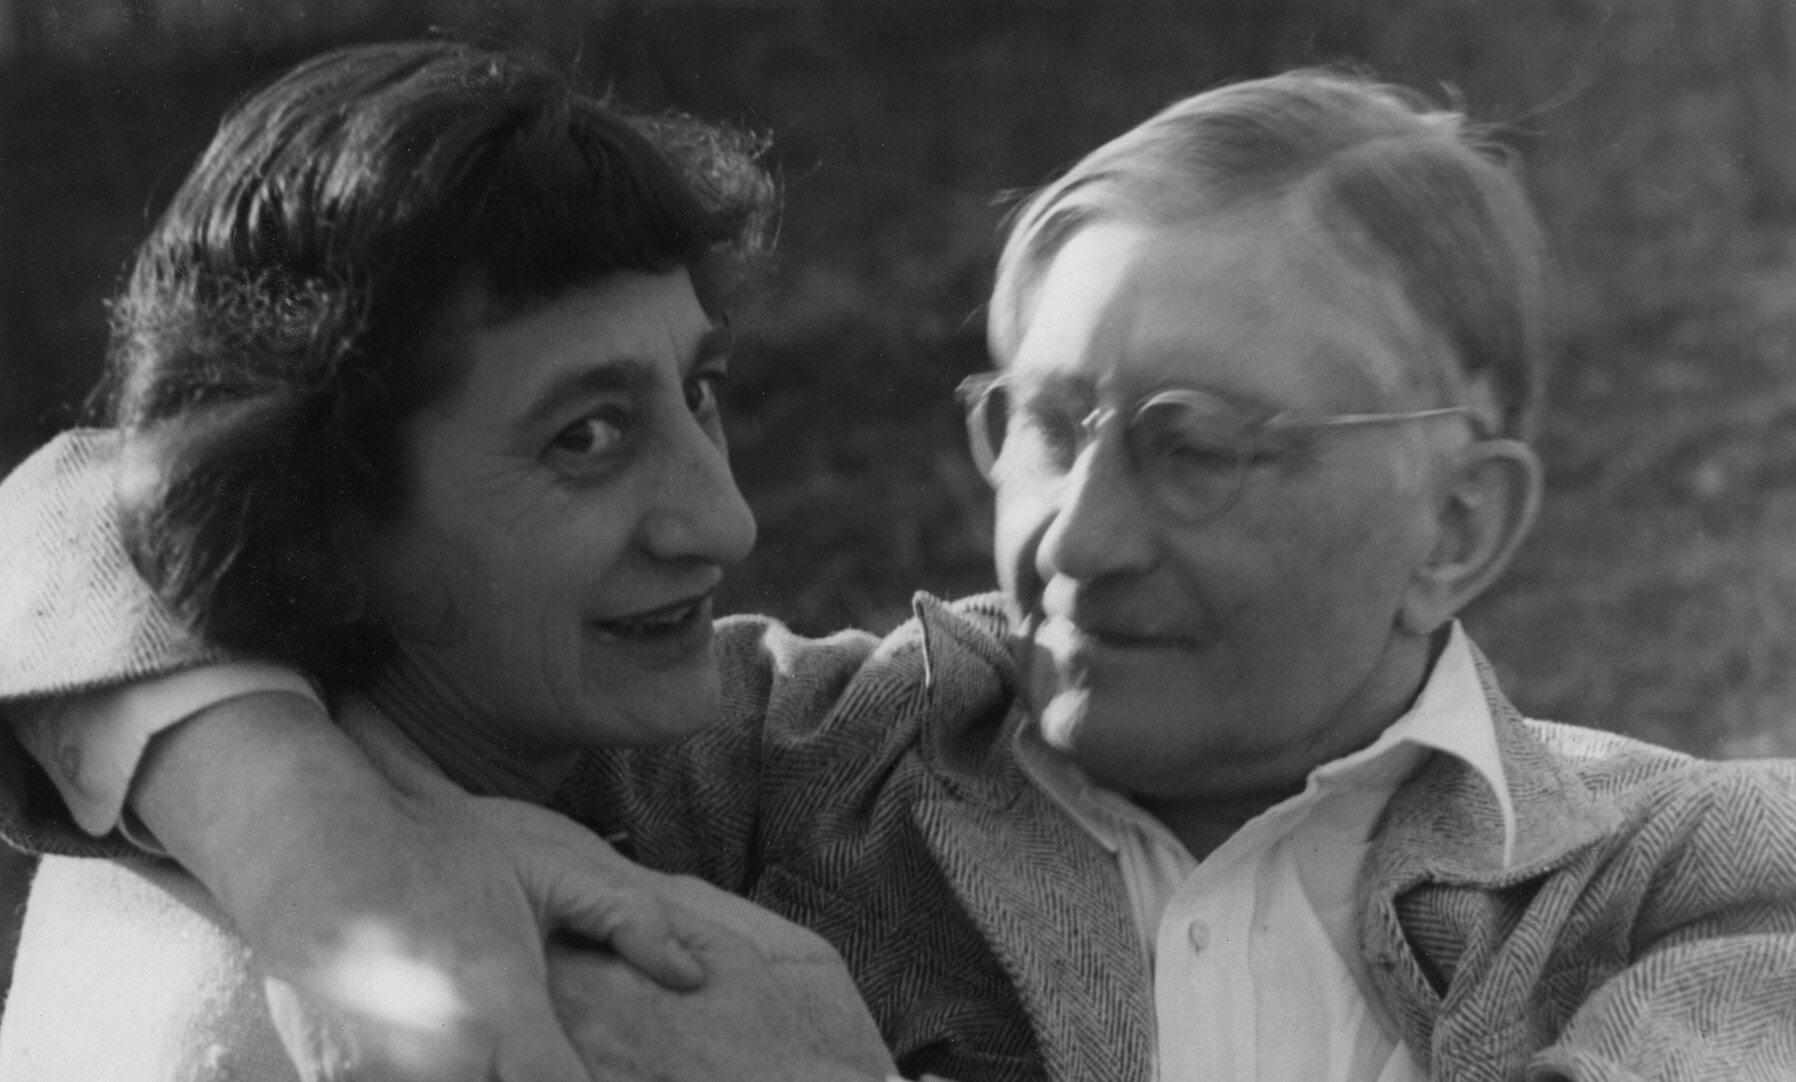 A detail from a photo of Josef and Anni Albers at Black Mountain College in 1949.